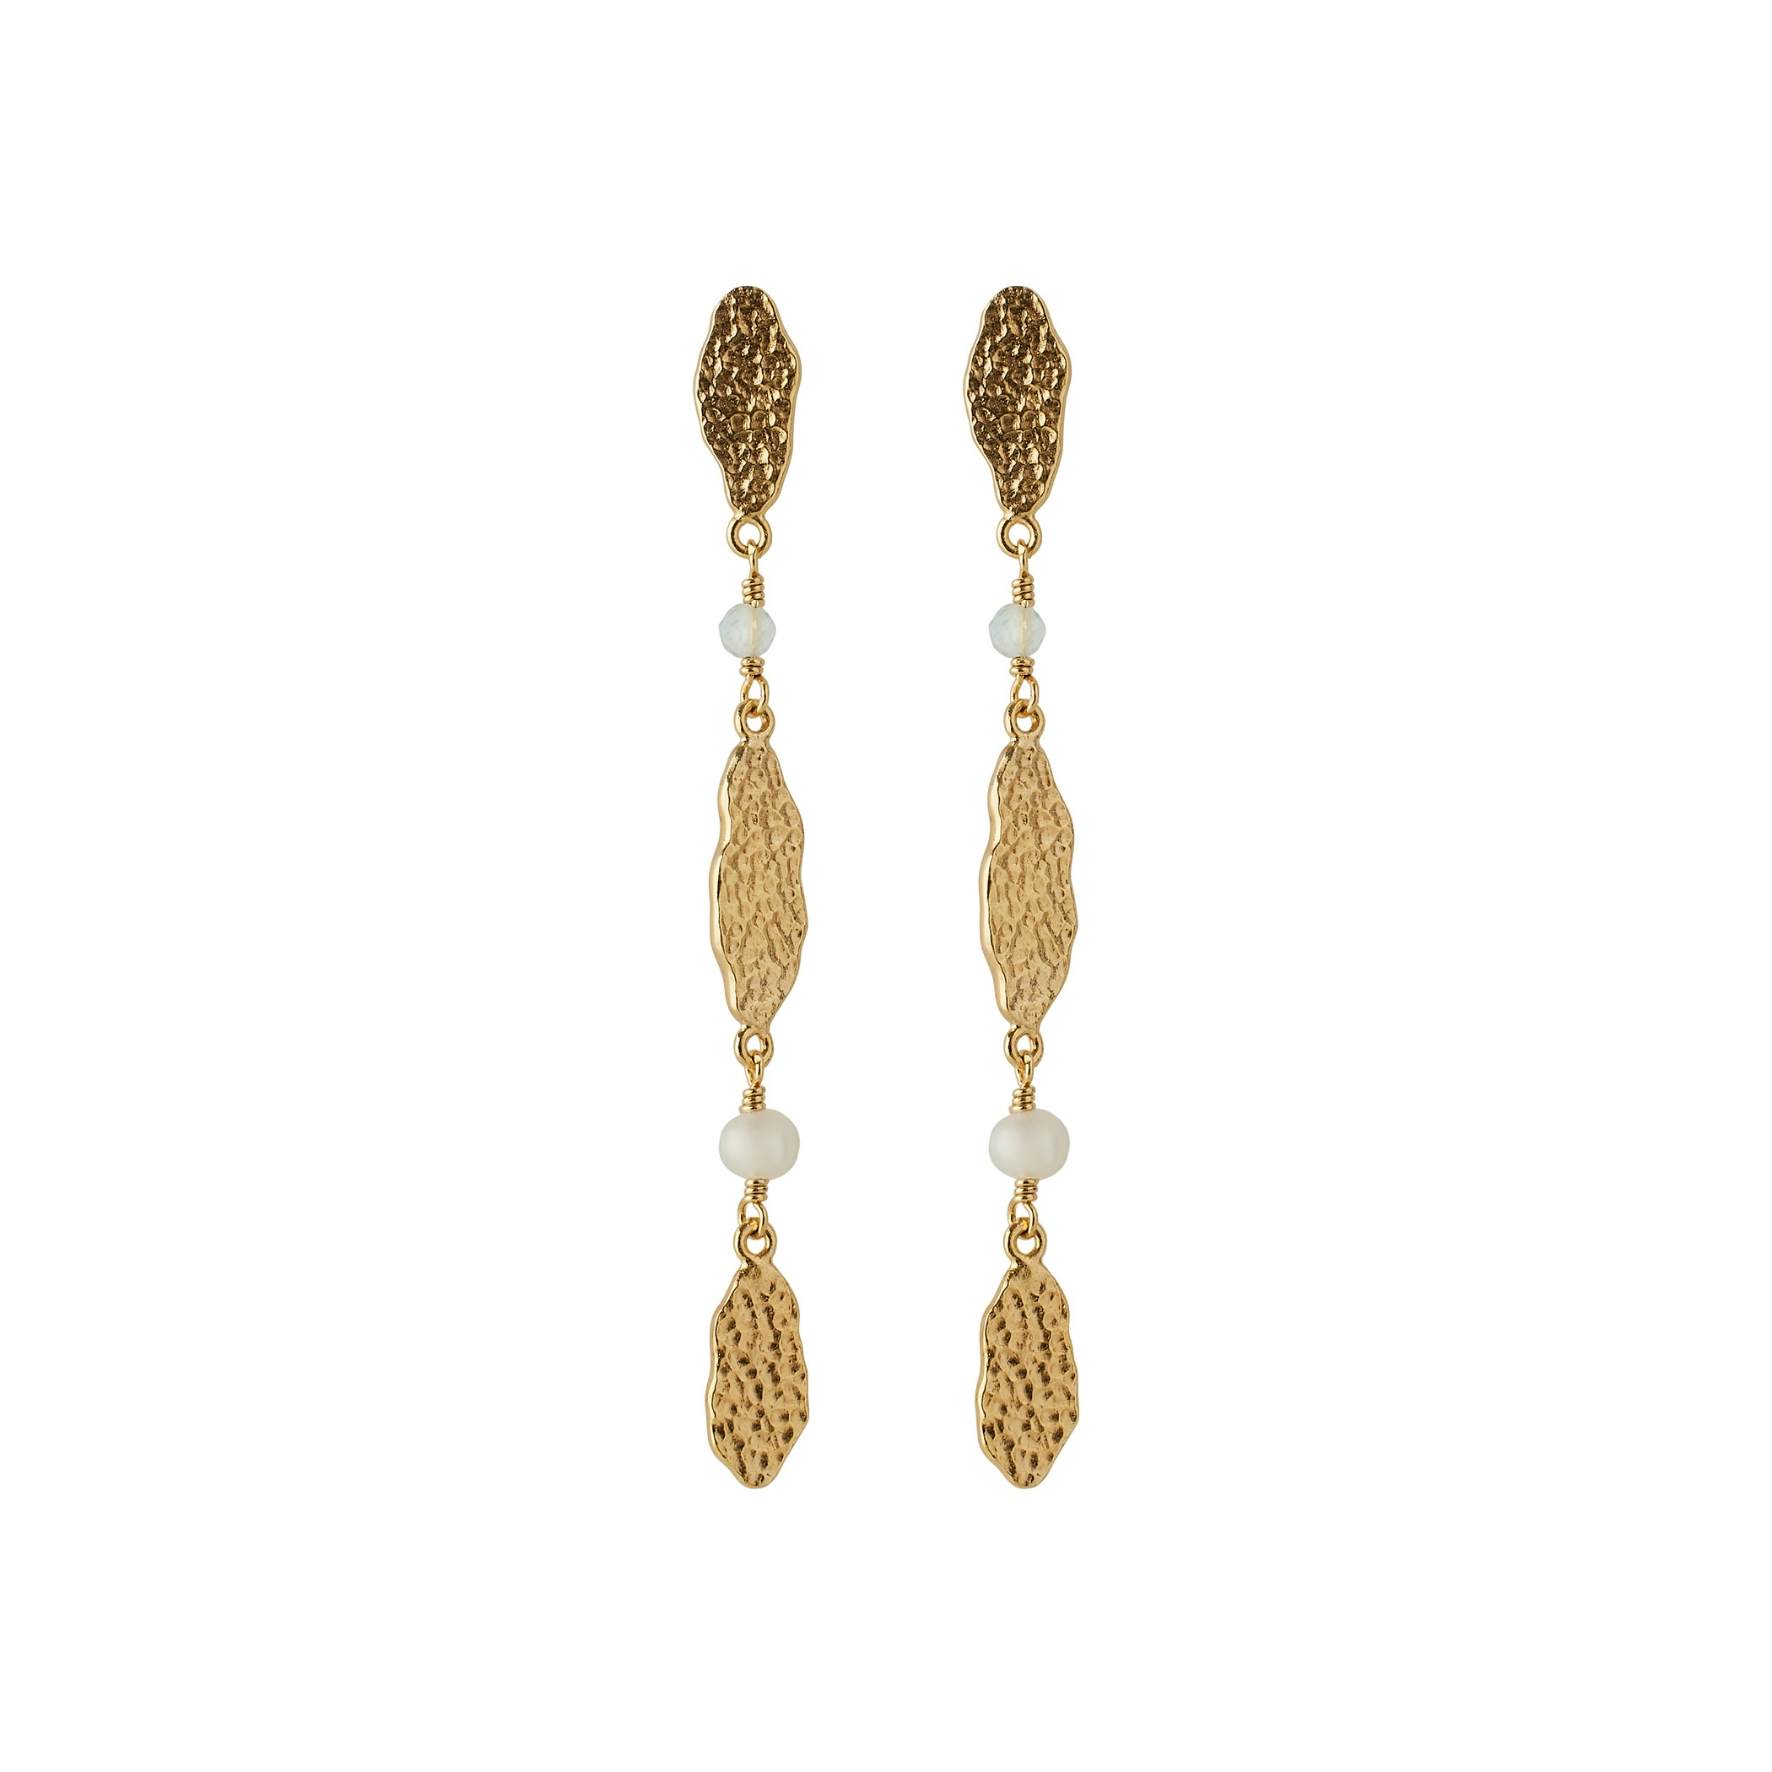 Drifting Dreams Earrings from Pernille Corydon in Goldplated-Silver Sterling 925